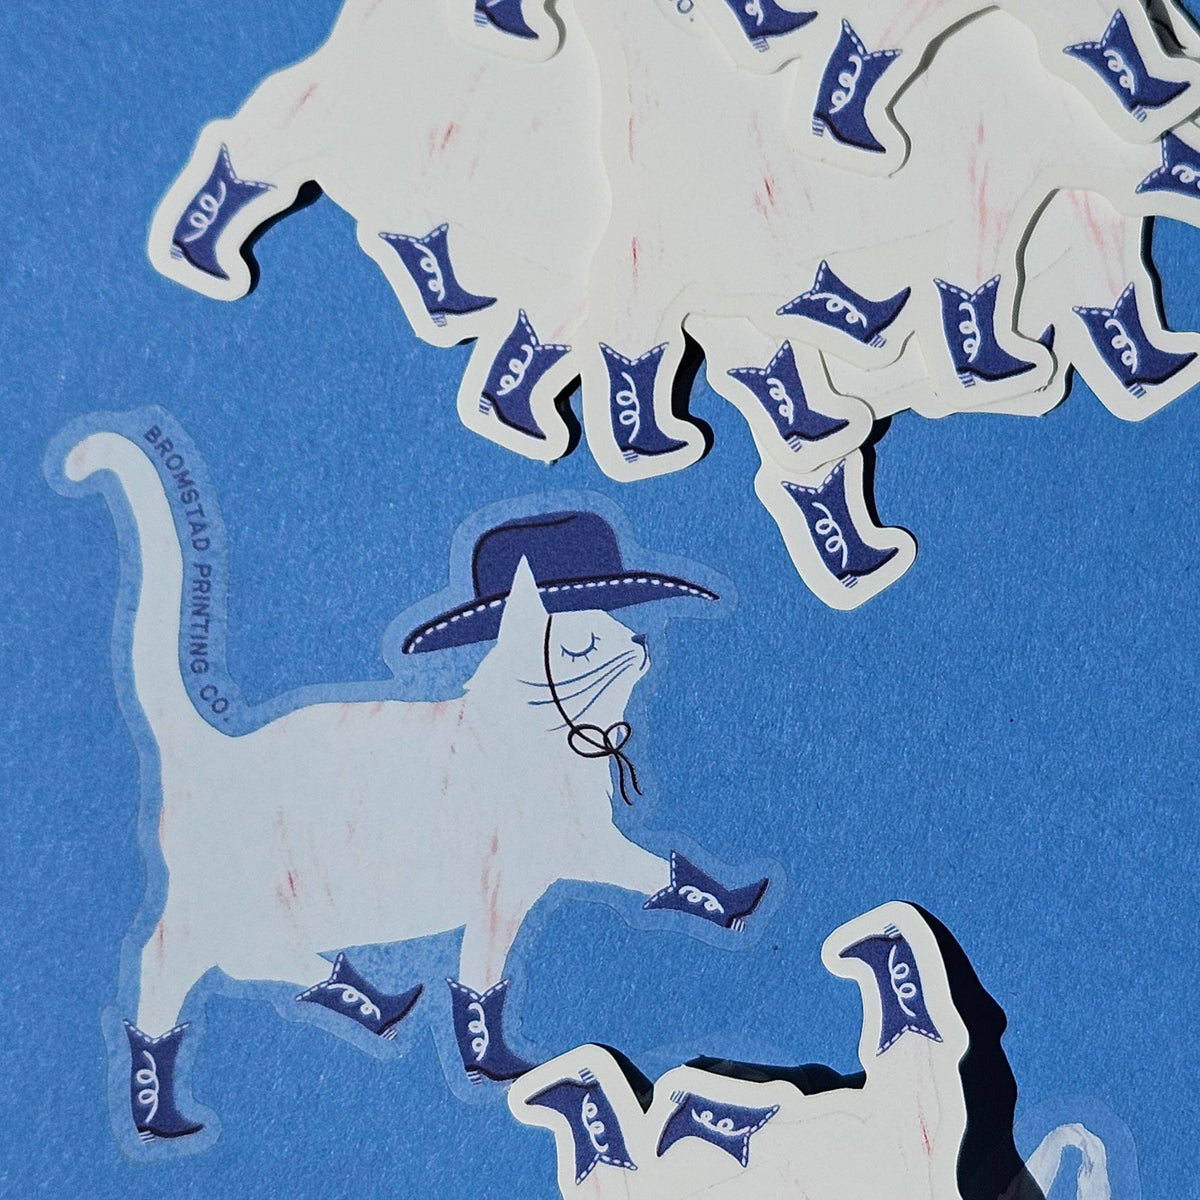 Get Perfect Cat Parade Transparent Sticker Here With A Big Discount.